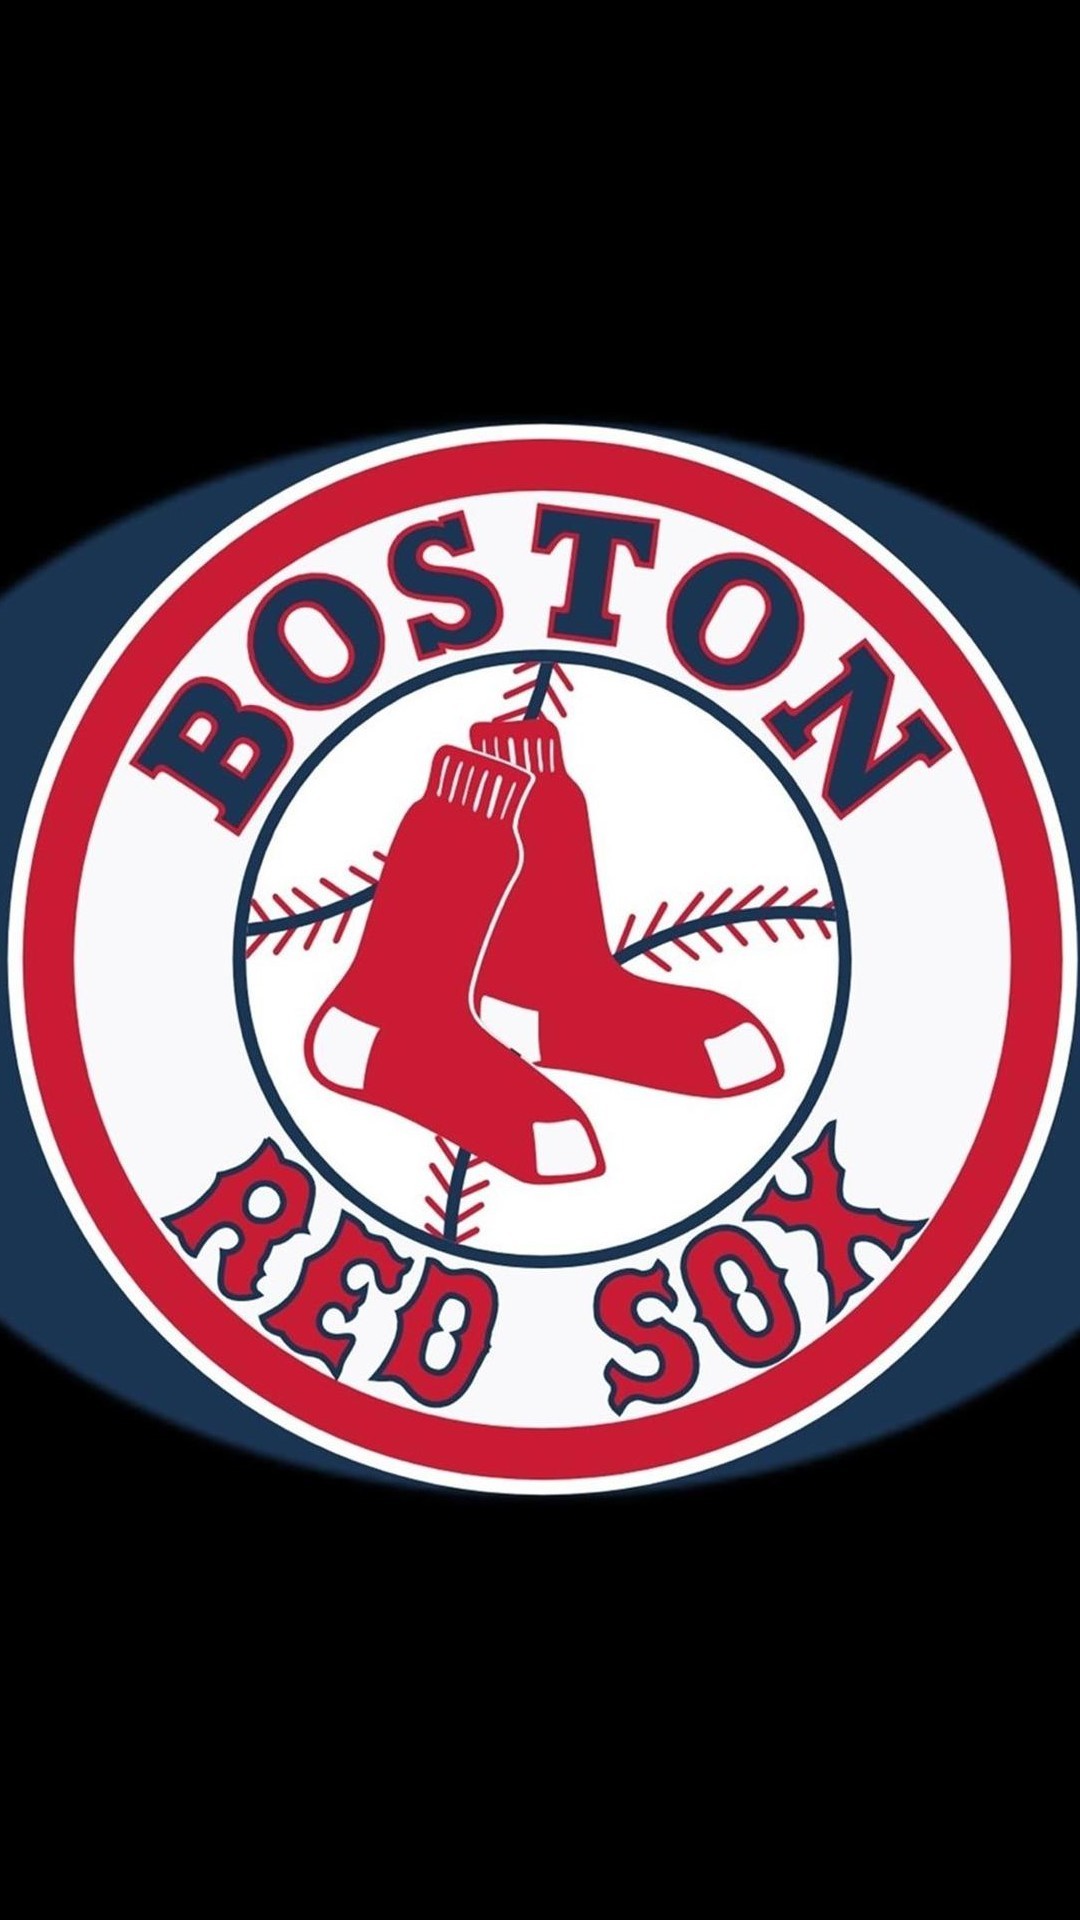 Samsung Galaxy S5 Plus Wallpaper: Red Sox Mobile Android Wallpapers